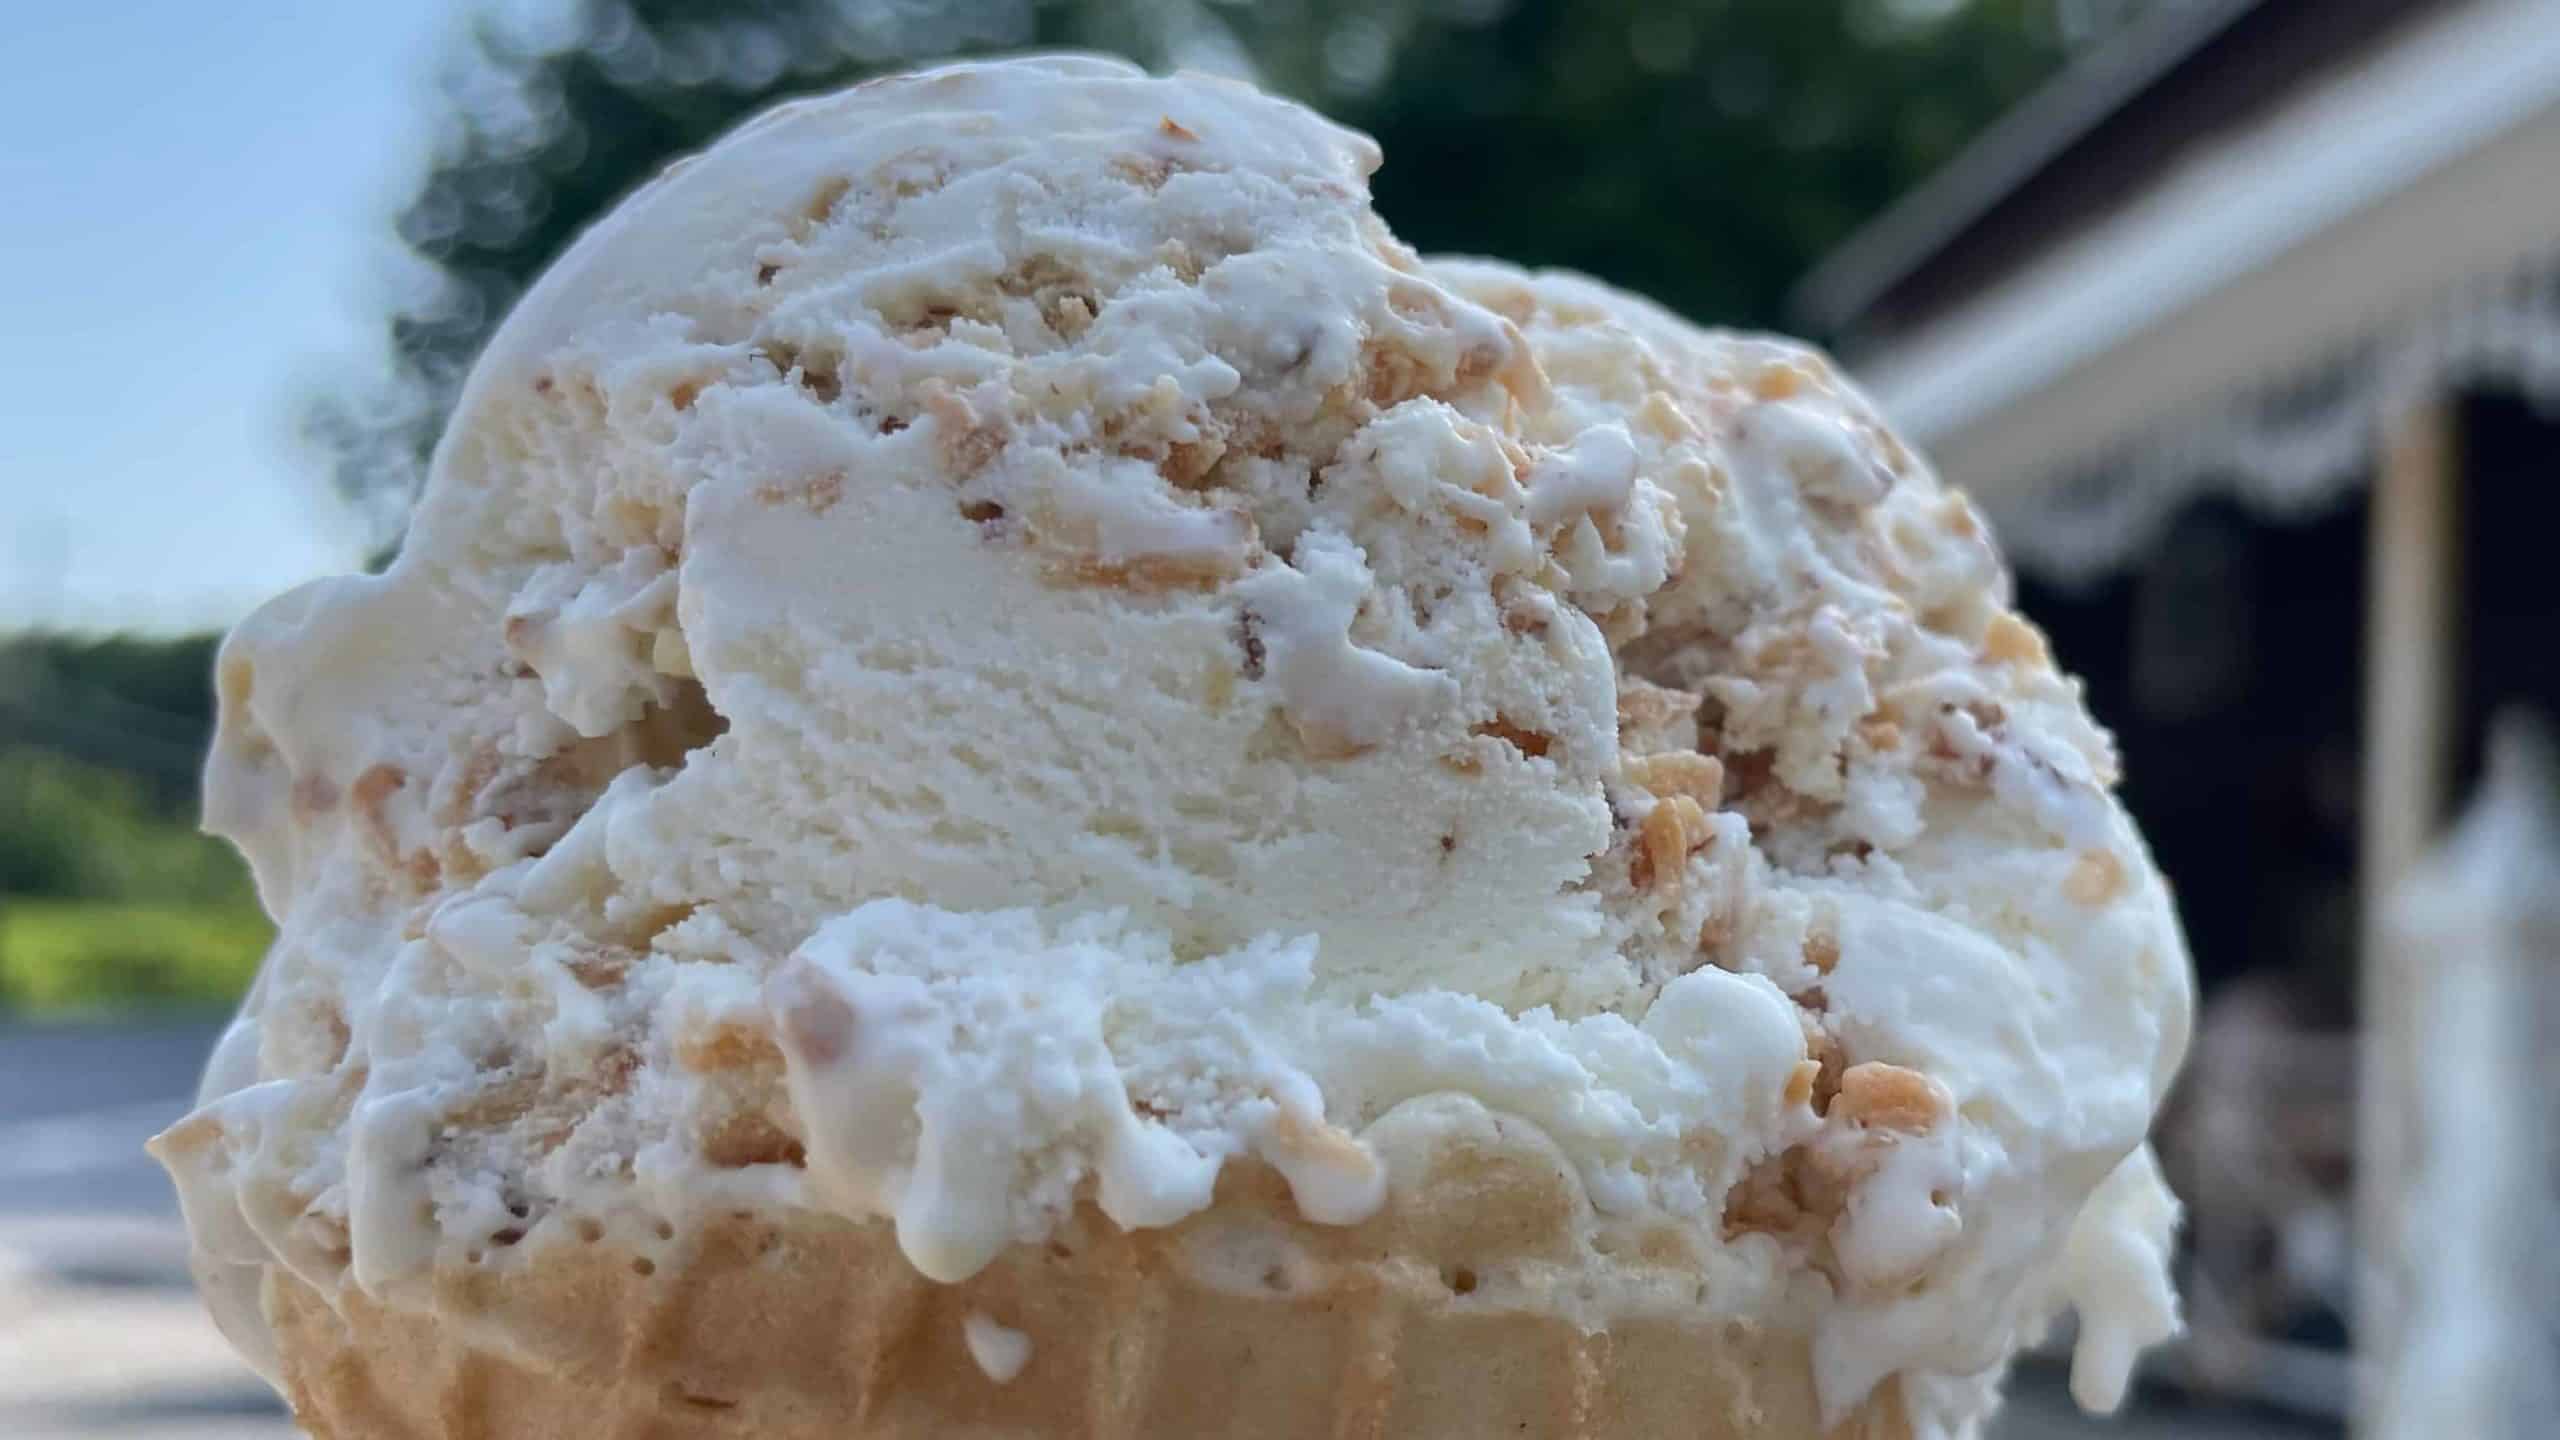 Toasted coconut almond ice cream at the Chocolate Barn.